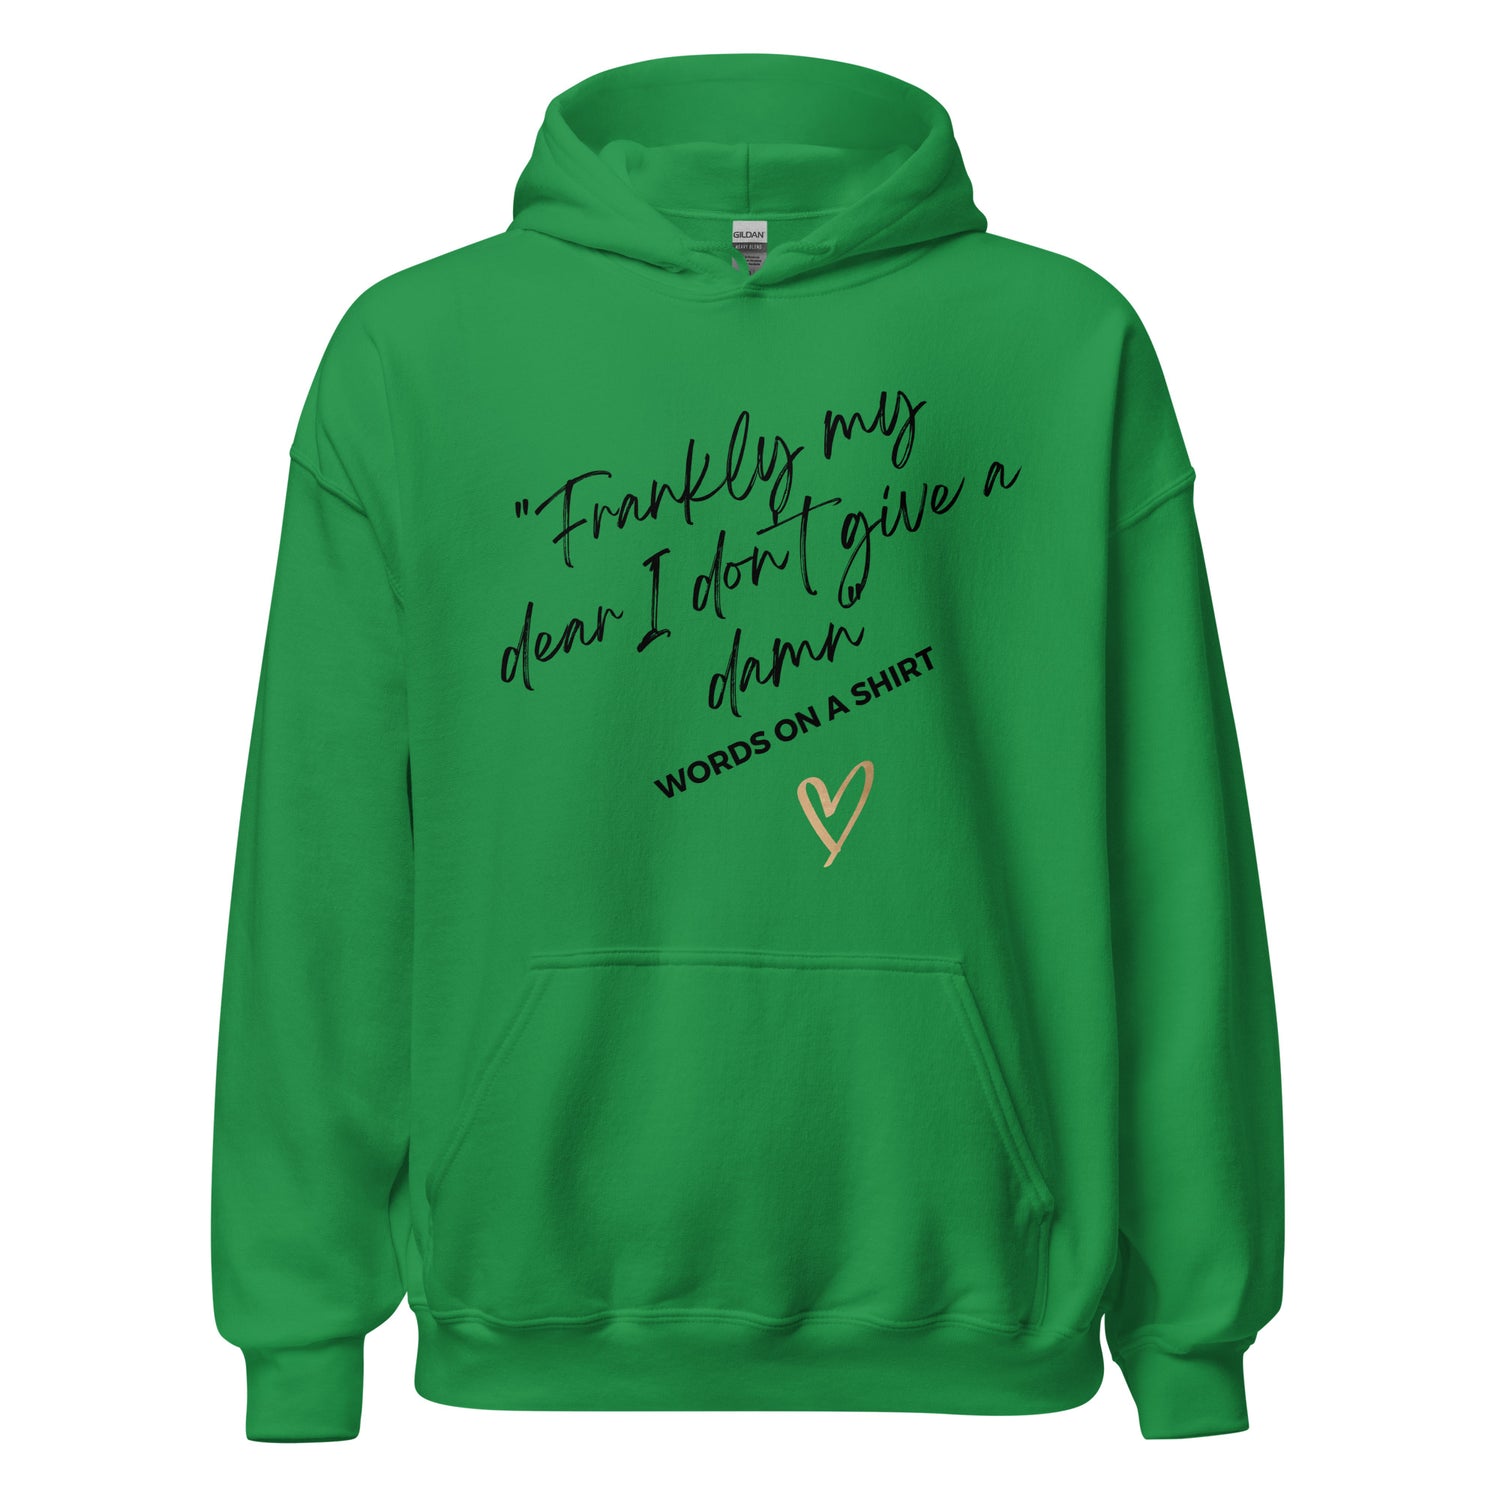 Face the chill with this chic, cozy hoodie! Its ultra-soft feel will keep you comfortable all night. Dare to be daring with this statement piece, reminding you of the classic line from "Gone With the Wind":“Frankly My Dear, I Don't Give a Damn”!